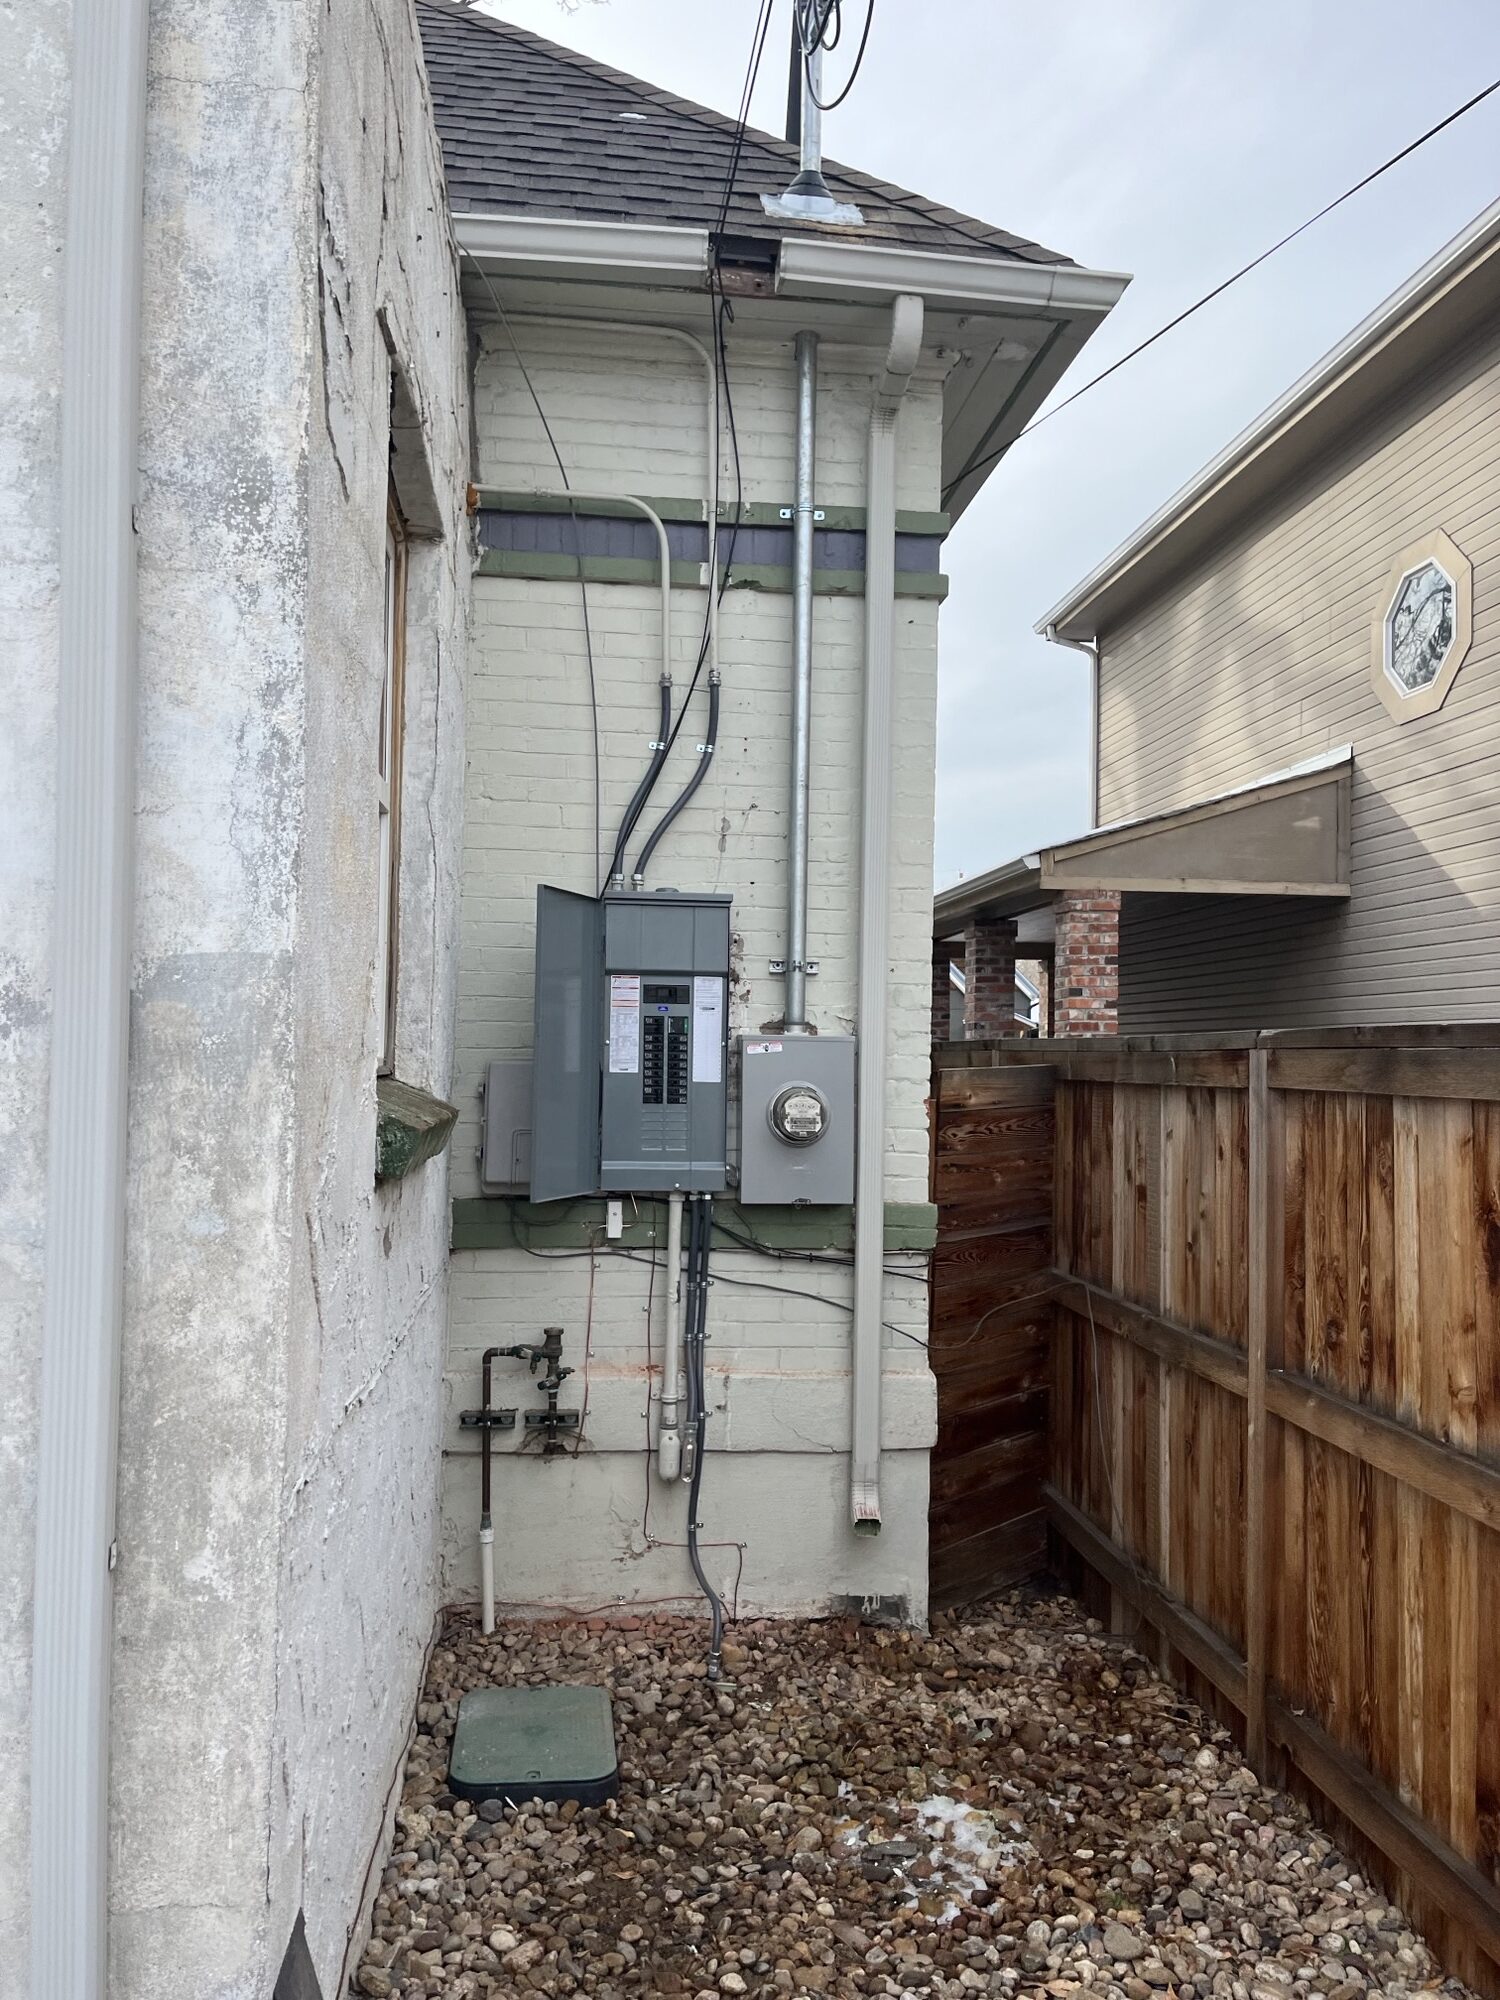 Denver electrical panel installation services by JM Electric, Inc.